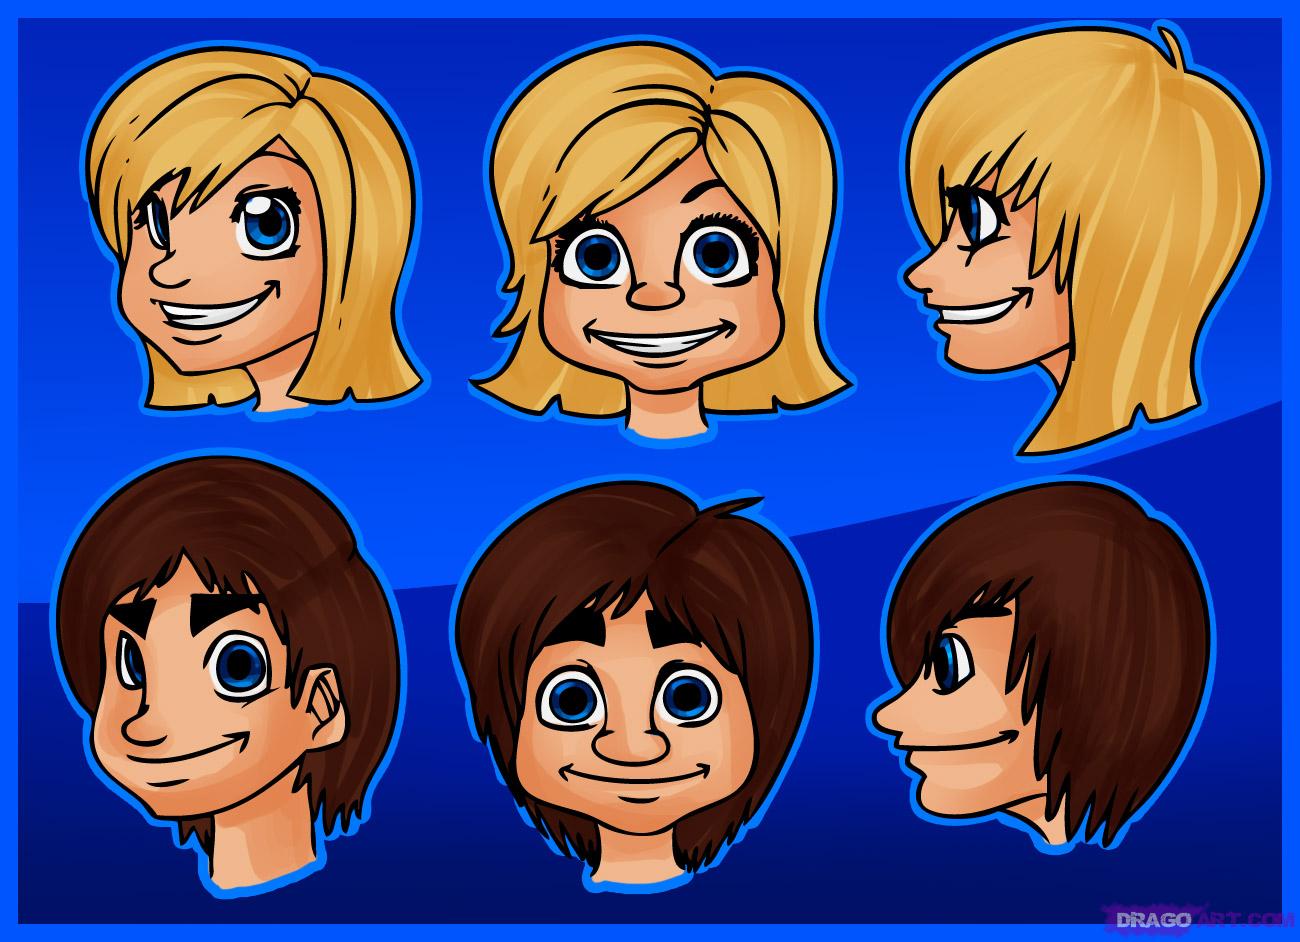 How to Draw Cartoon Faces, Step by Step, Faces, People, FREE ...